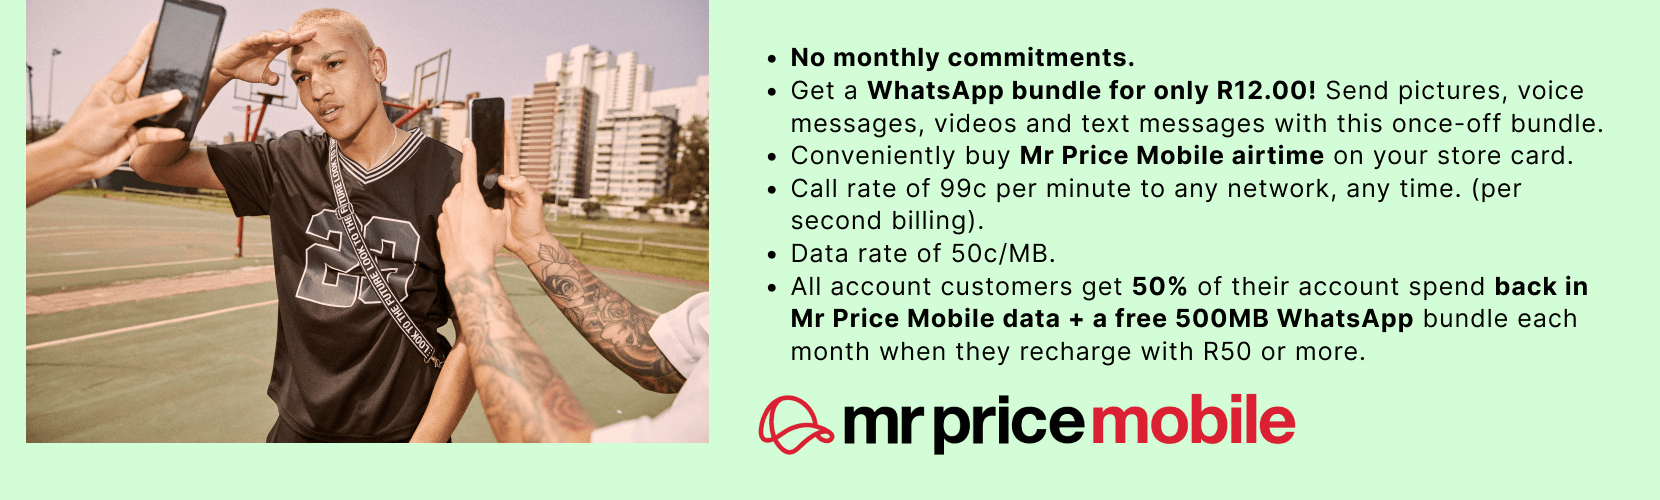 Mr Price Money Airtime and Data bundle prices